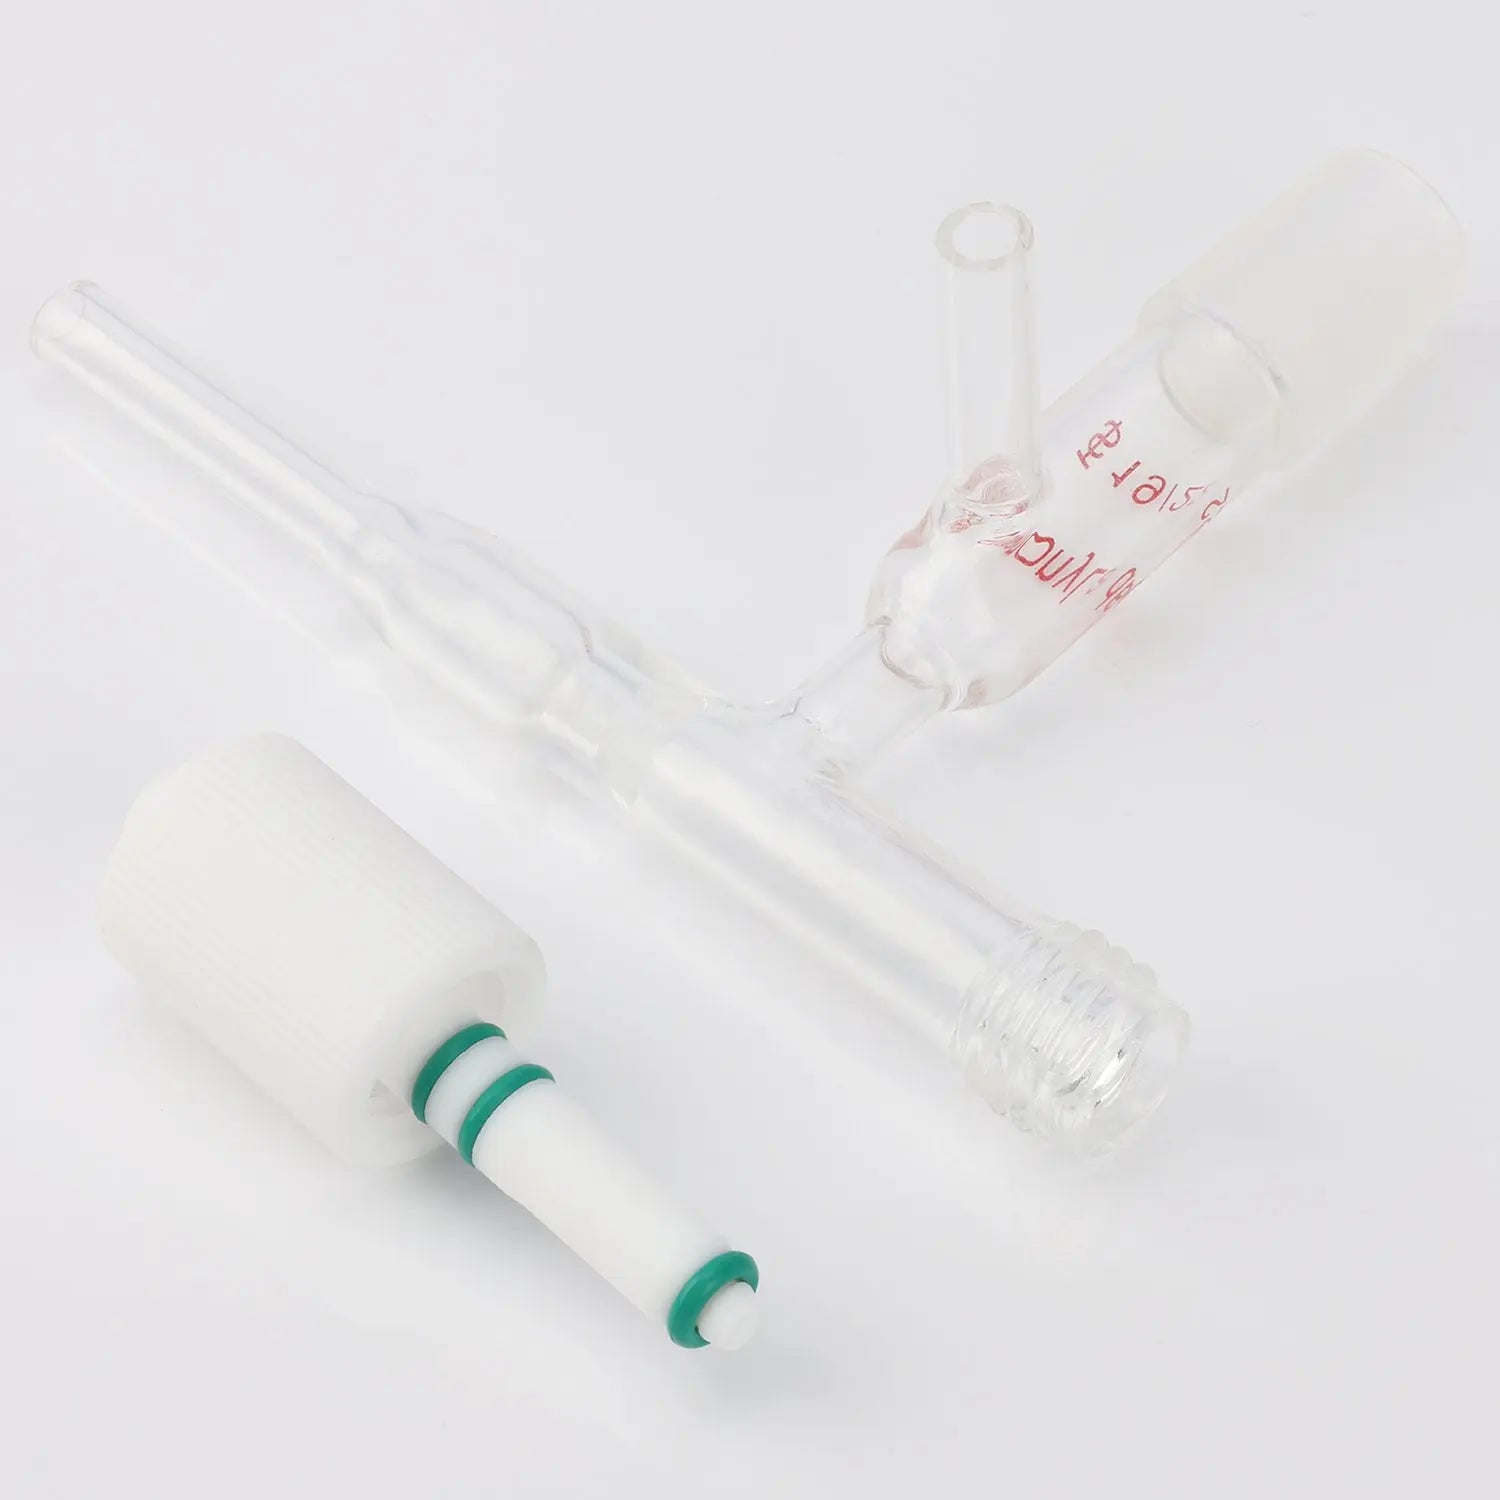 Chromatography Flow Control Adapter Adapters - Flow Control / Vacuum